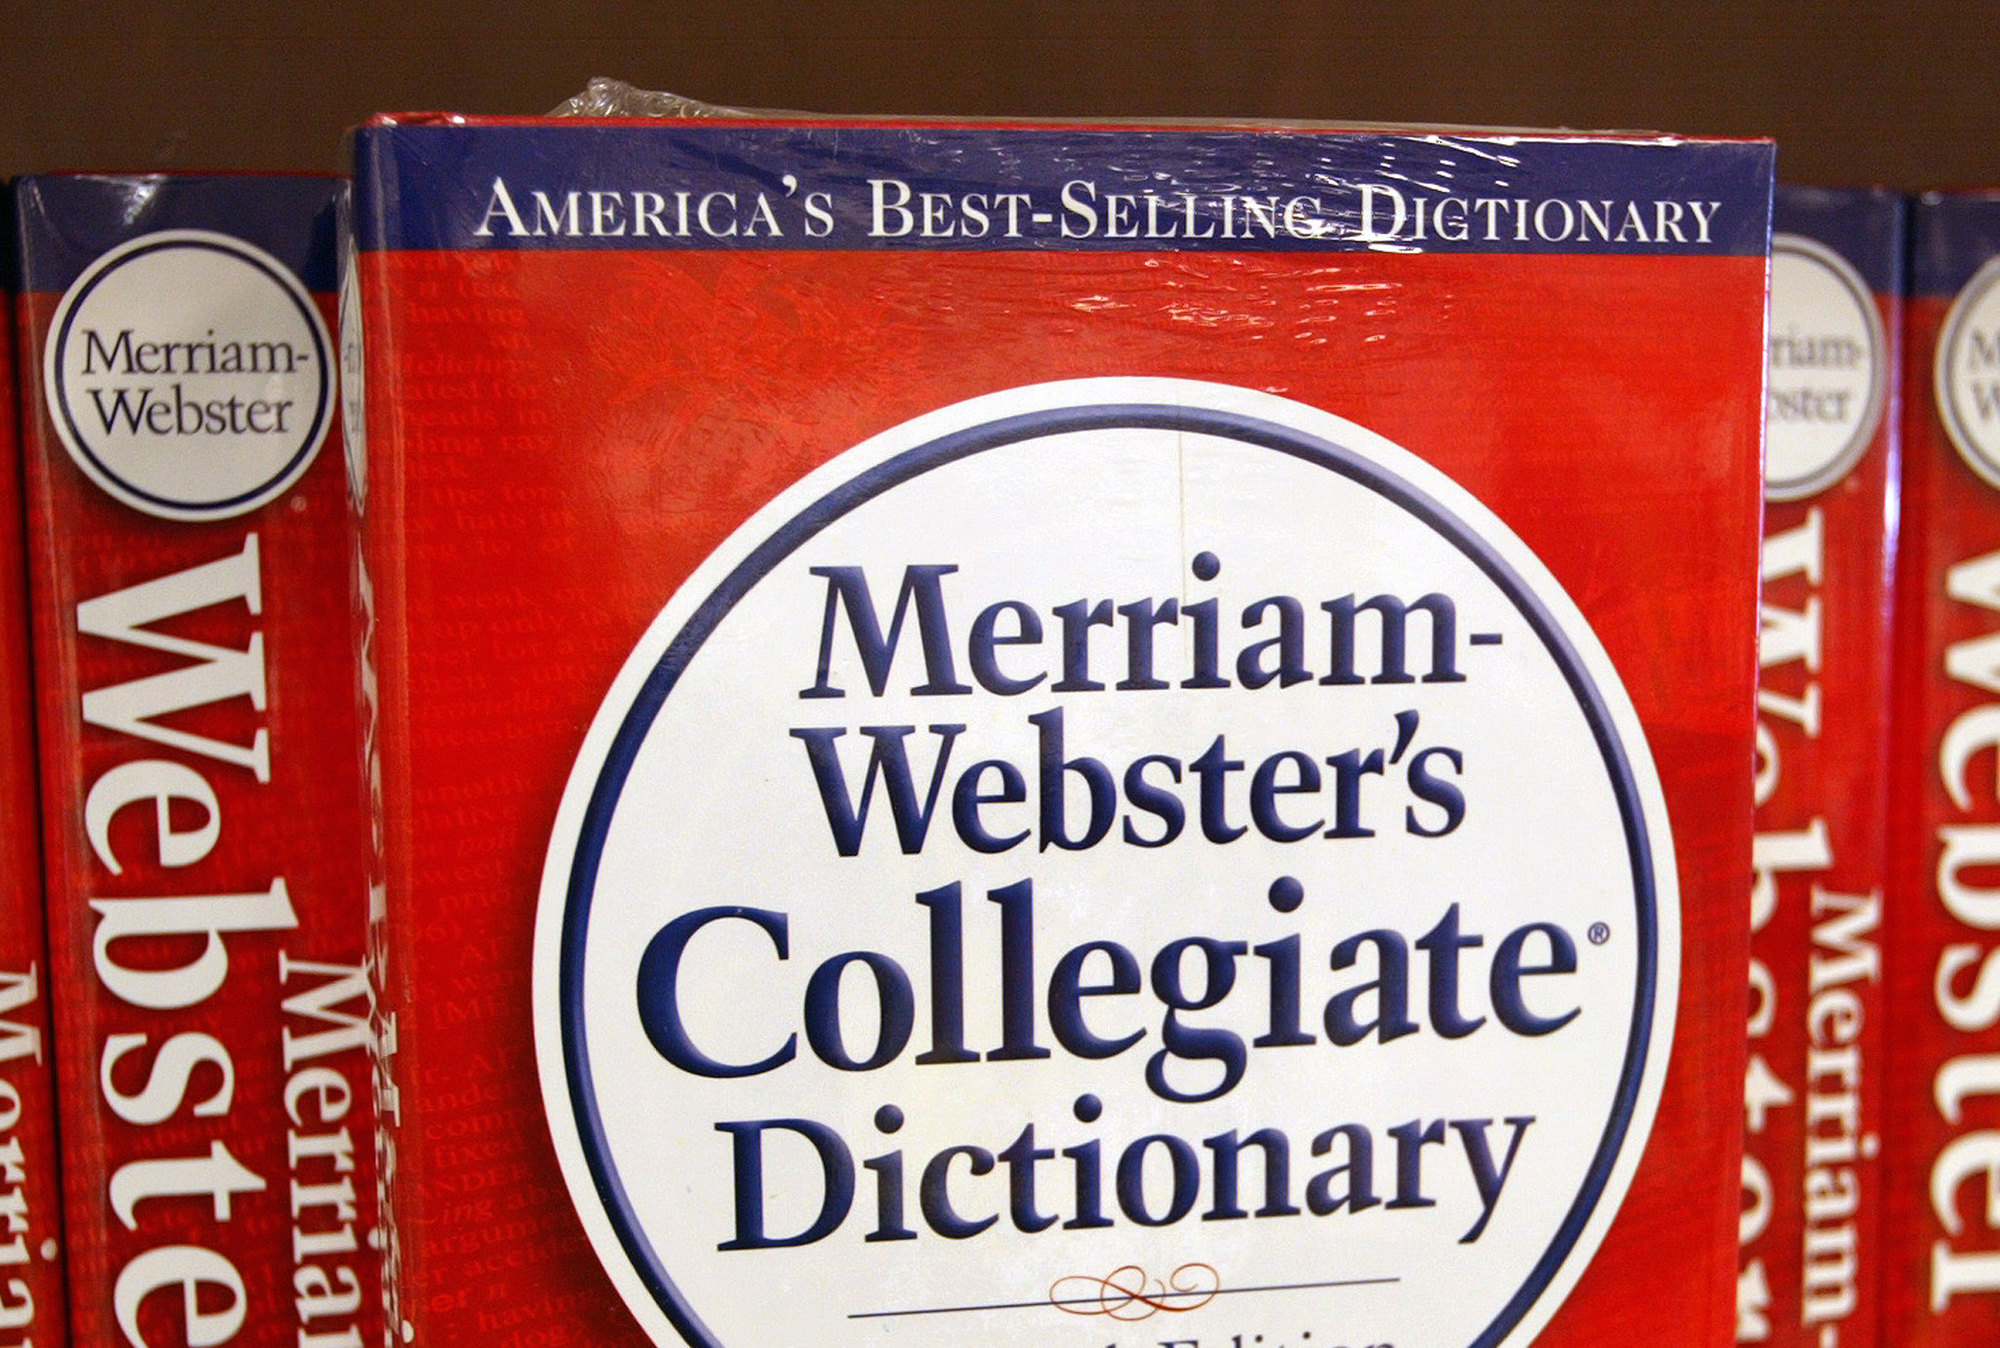 Merriam-Webster-Shades-Donald-Trump-shithole-countries